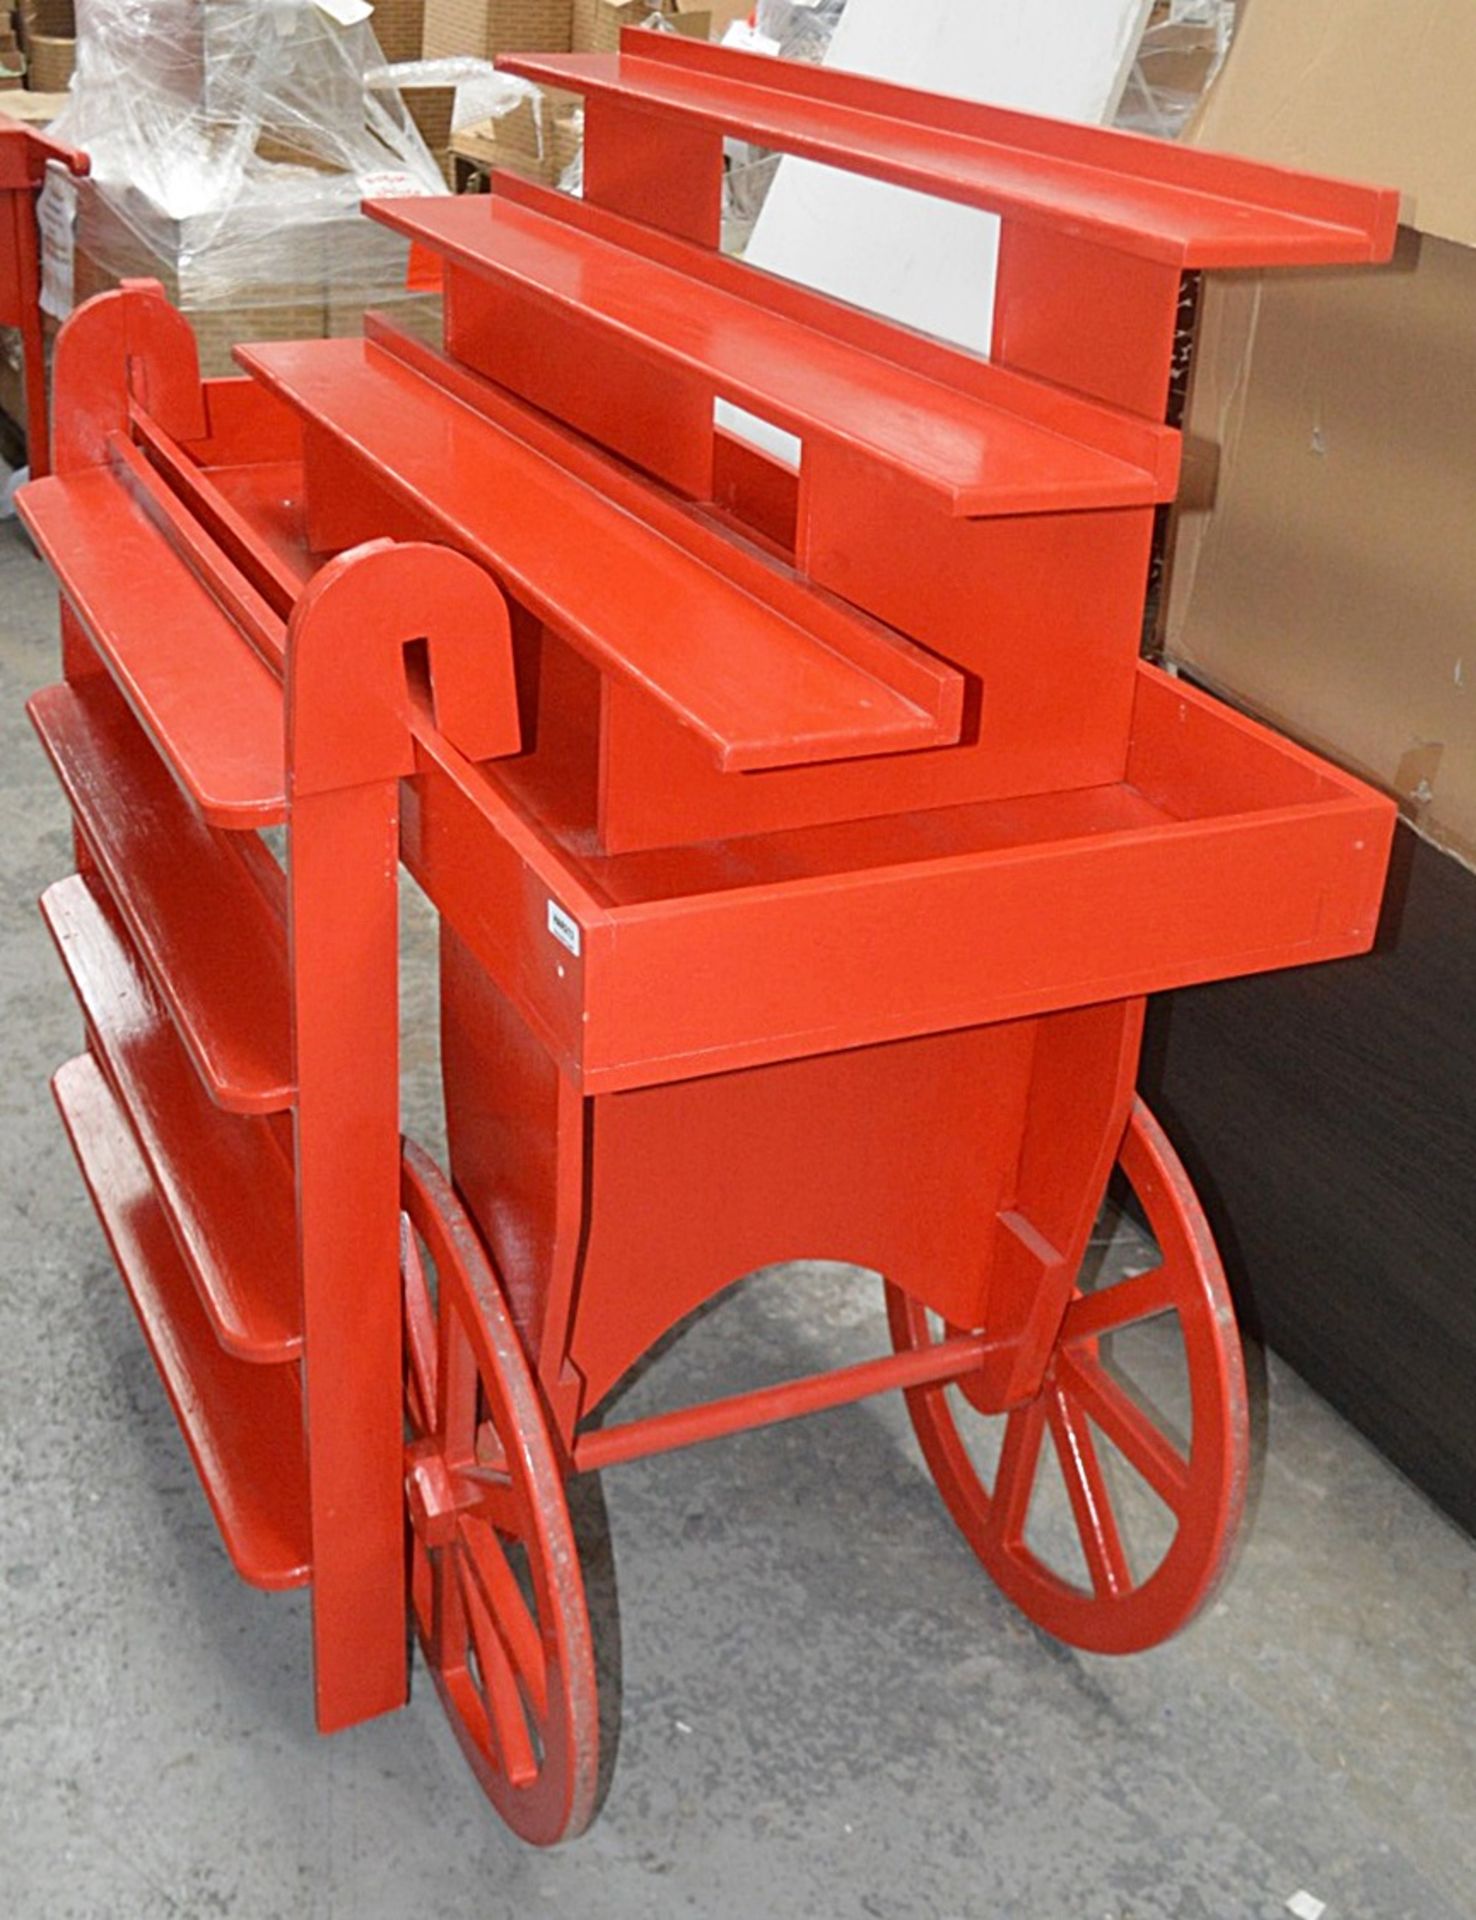 1 x NOOK Bespoke Wooden Display Retail Cart And Ladder In Red - Dimensions: H136 x W180 x D80cm - Image 2 of 5